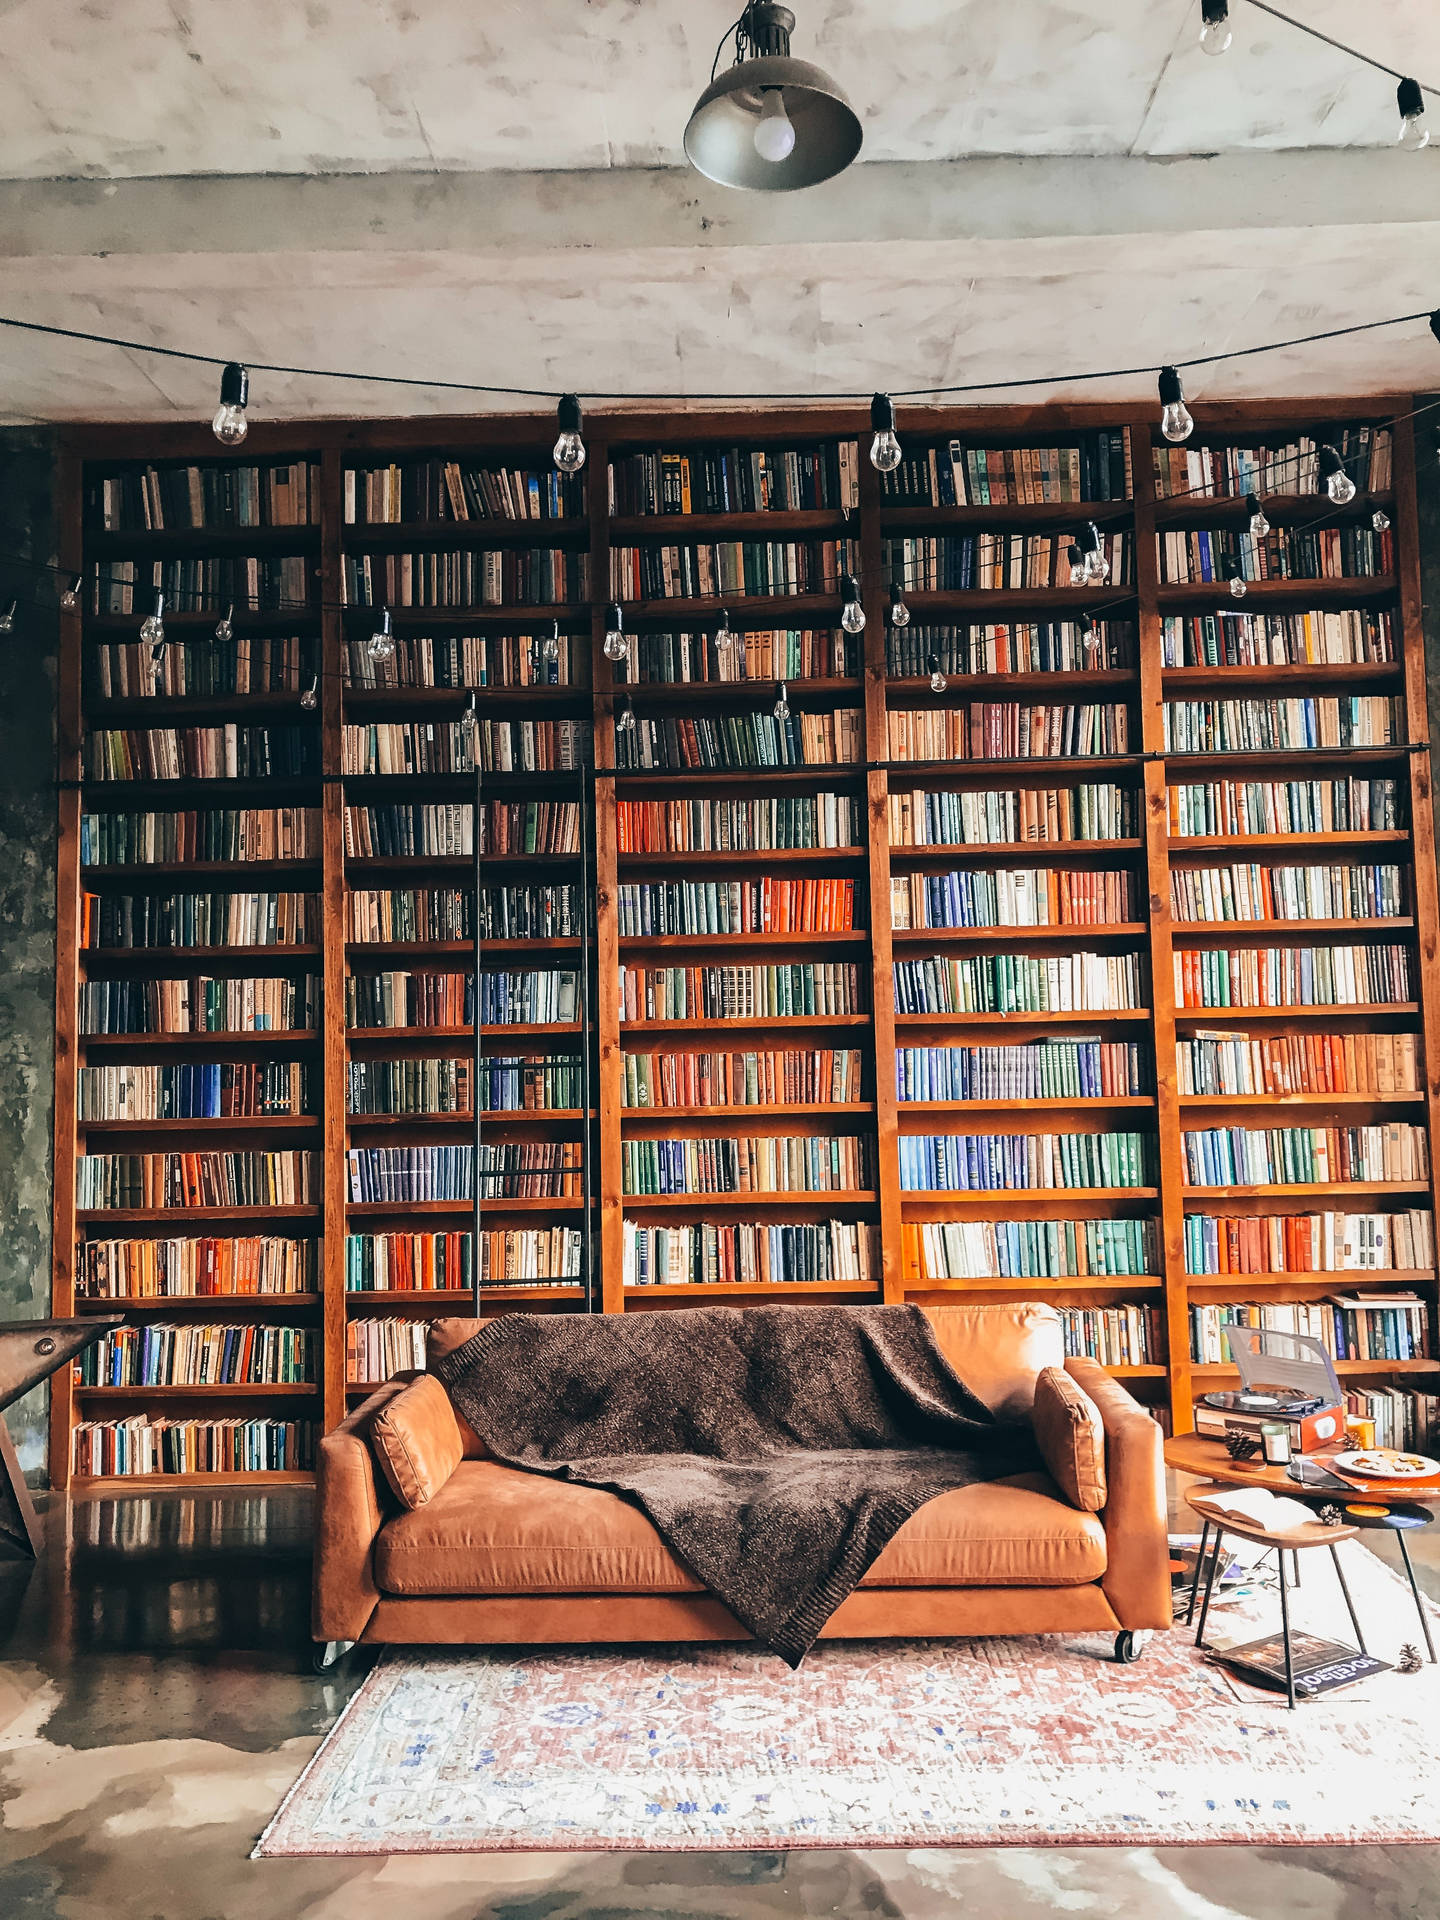 Traditional Library Interior With Cozy Couch